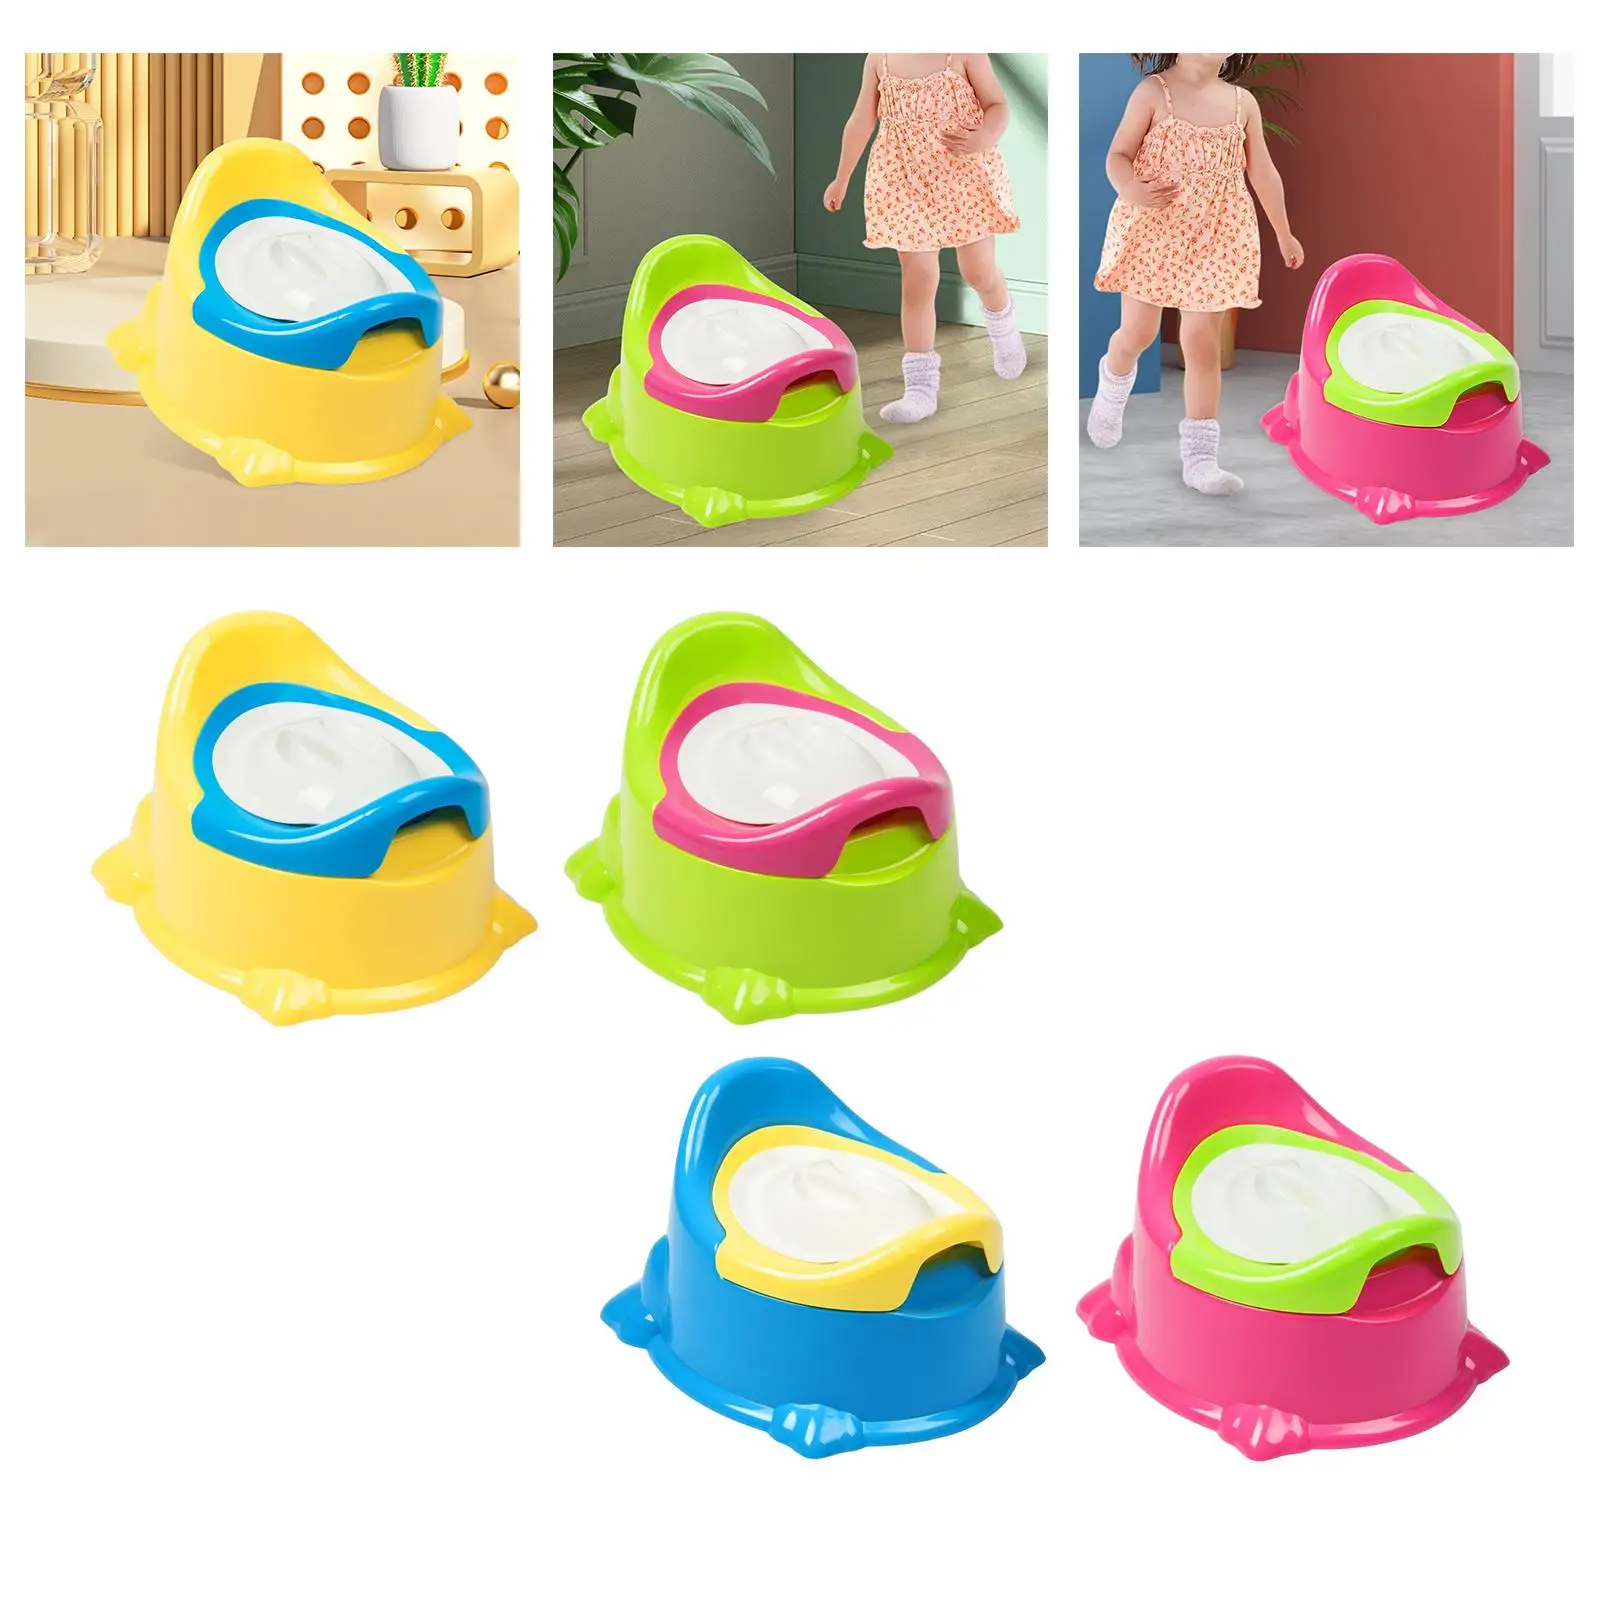 Portable Child Potty Kids Toilet Seat Comfortable for Babies 6-12 Month